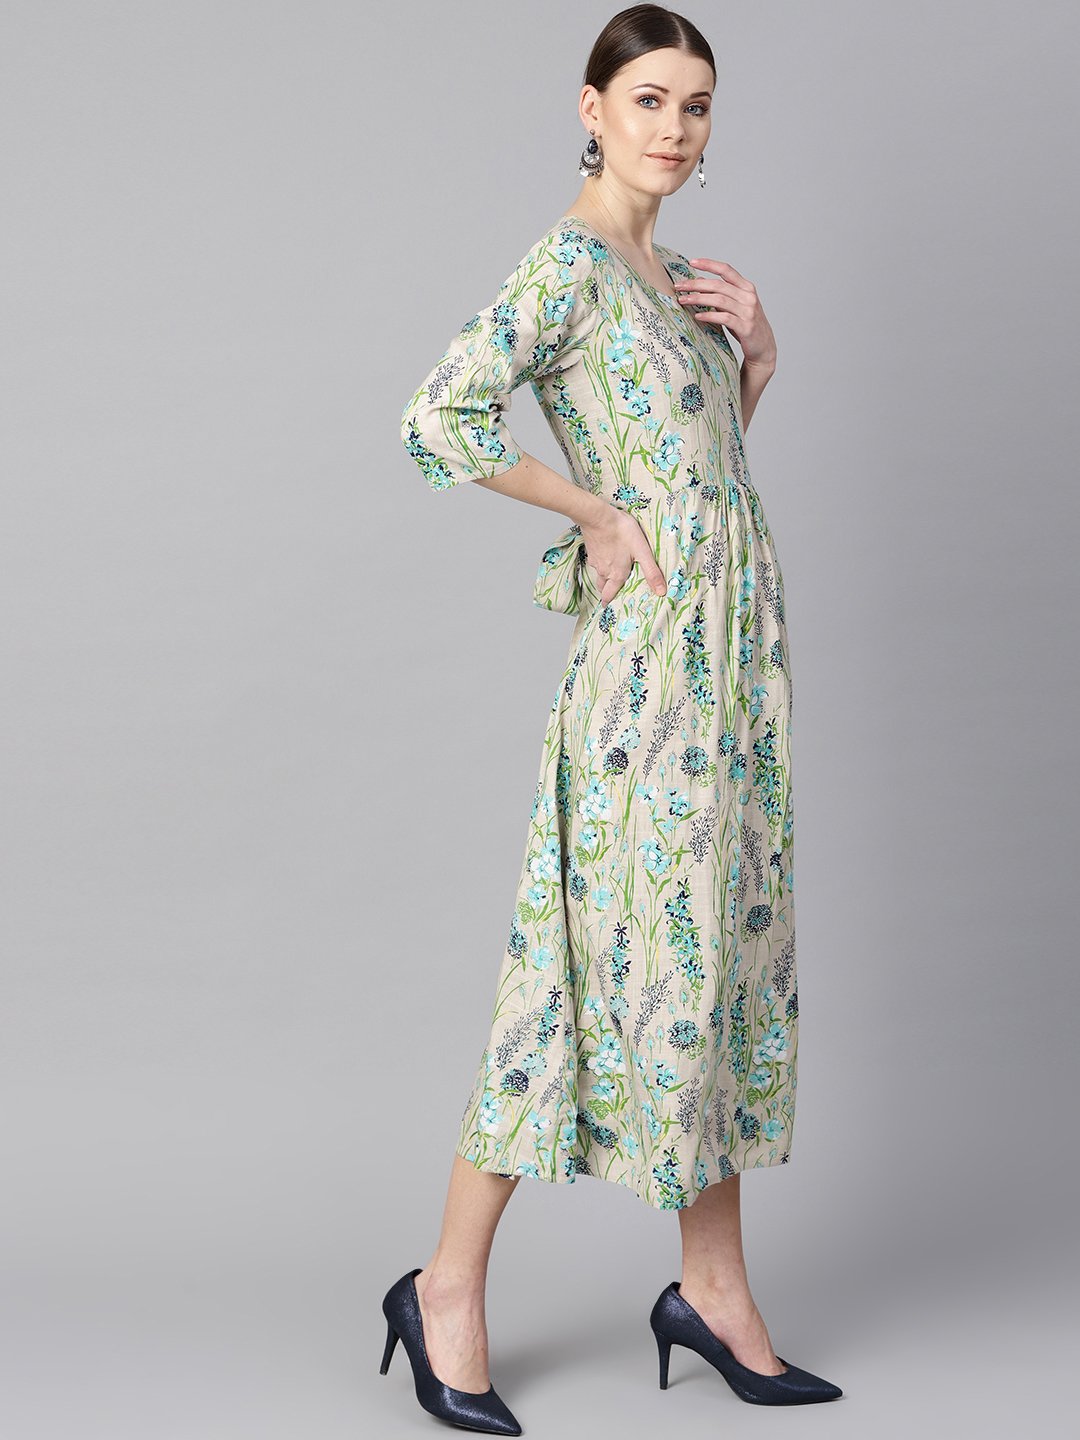 Women's Floral Print Dress With Gathers In Centre With A Belt At The Back - Nayo Clothing